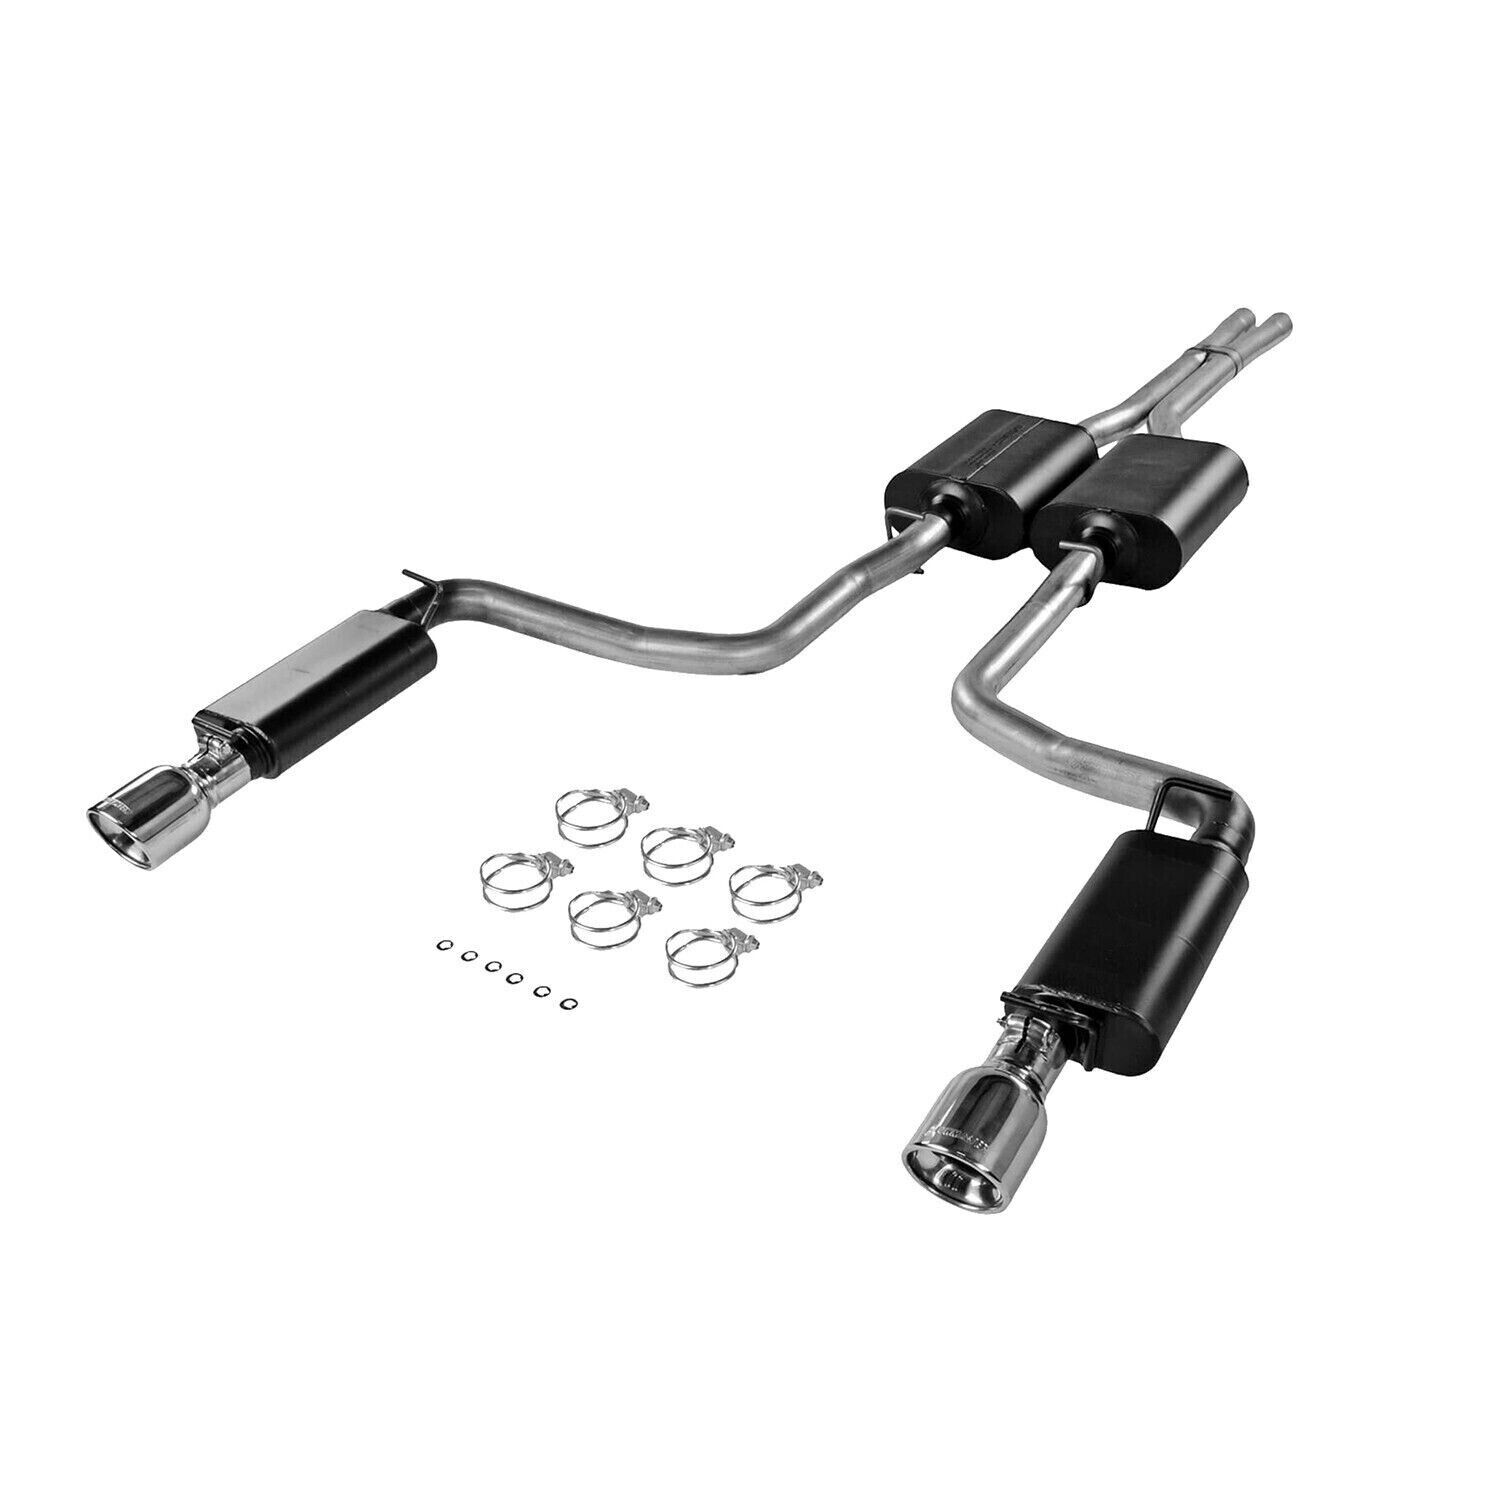 Flowmaster Force II CatBack Exhaust Fits 05-10 Dodge Charger/Magnum 2WD/4WD